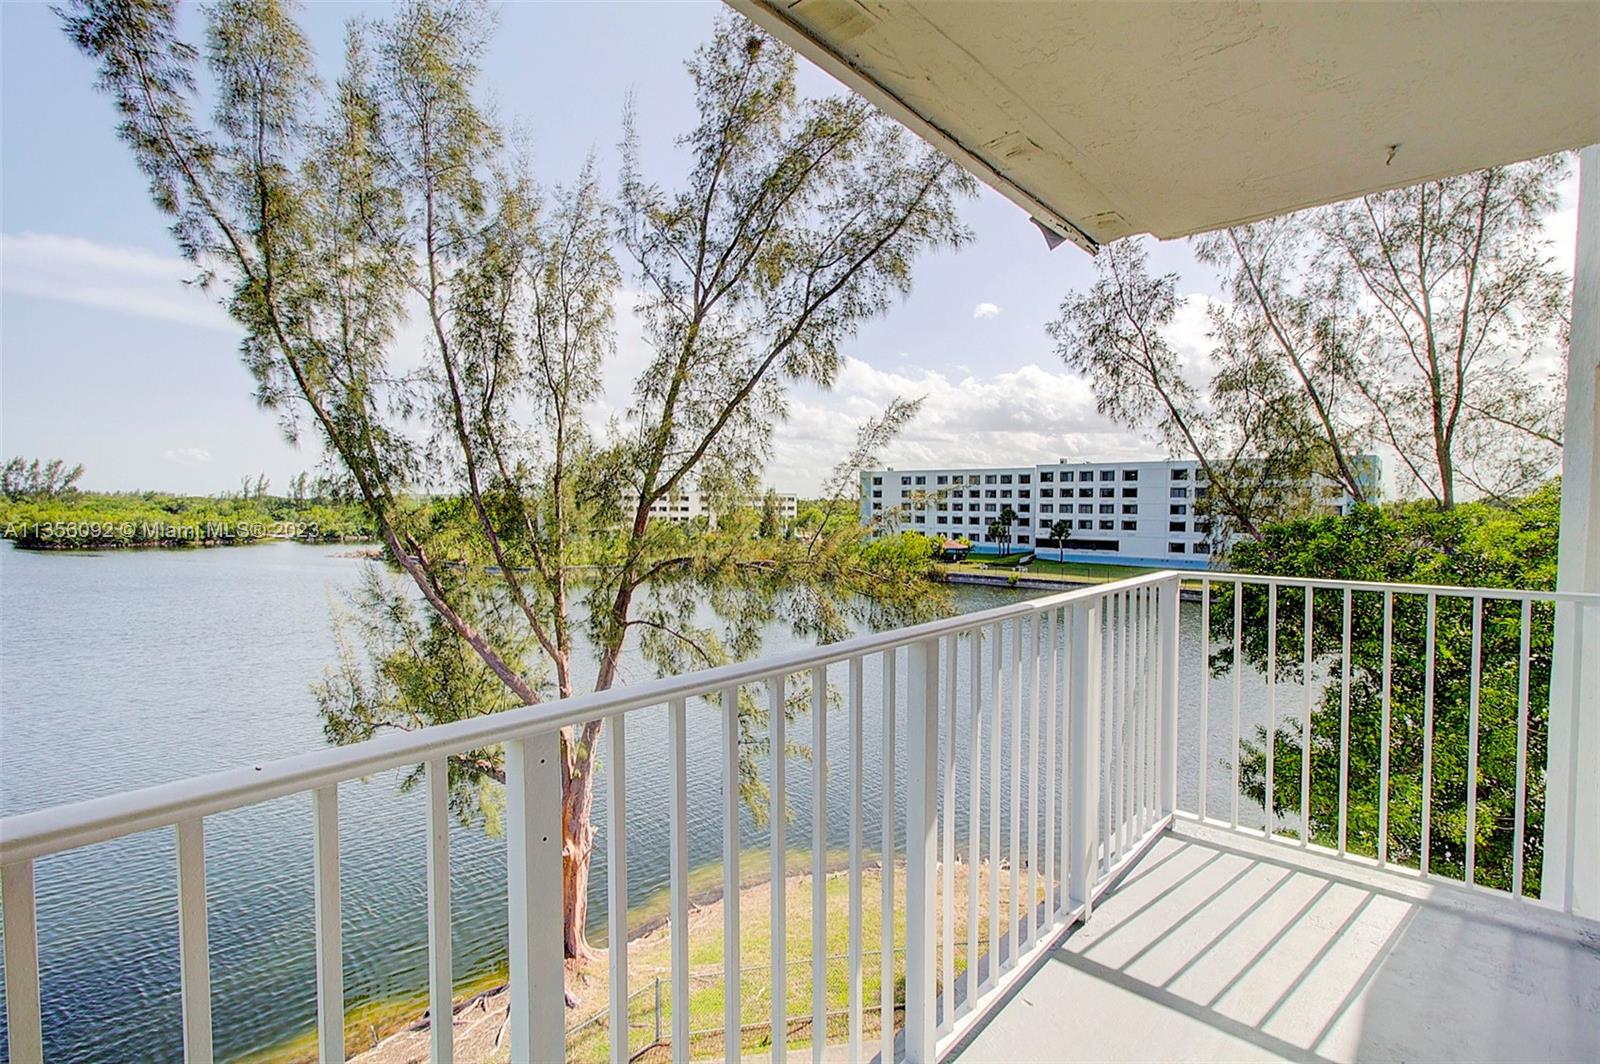 Welcome to Saga Bay Gardens Condo. Totally updated 2/2 apt in the 3er floor, corner unit with a gorgeous view to the lake, great for relax and feel the breeze of Black Point Marine. This condo has wood vinyl floors throughout, stainless-steel appliances, new kitchen cabinets, modern bathrooms and a laundry inside. It is gated community features an elevator, one assigned parking space, visitors' parking spaces, swimming pool, tennis court, BBQ area, gym, laundry facility, and clubhouse. The association includes water, waste, and maintenance of the common areas. Ready to move. Great location close to Old Cutler Rd, parks, Black Point Marina, supermarket and restaurants. Cutler Bay Town is growing with nice new project and developments, it is a good time!!!. Text Listing Agent. Easy to Show!